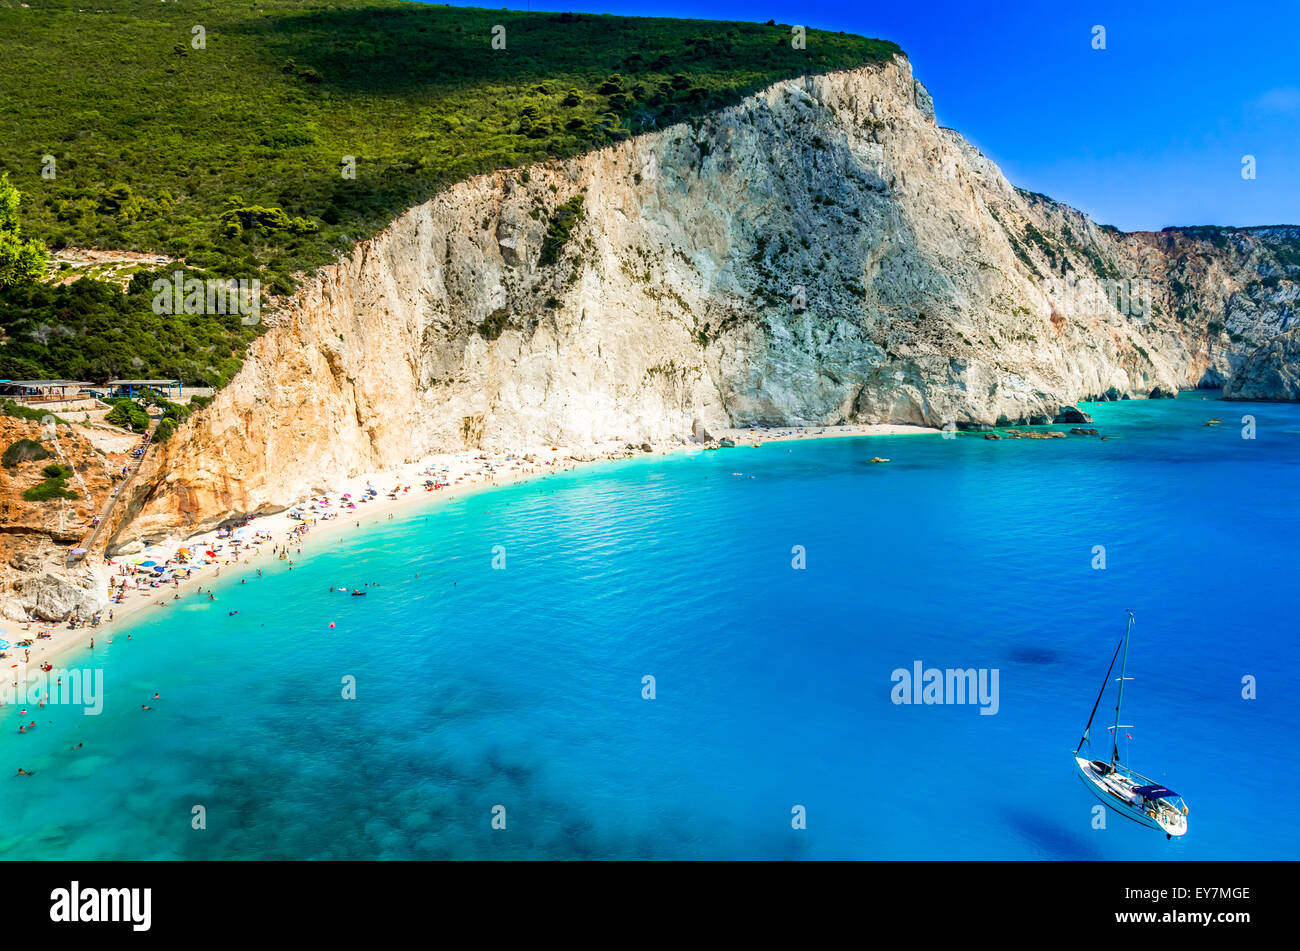 Porto Katsiki beach, Lefkada island, Greece. Beautiful view over the beach. Water is turquoise and there are a boat on the sea. Stock Photo